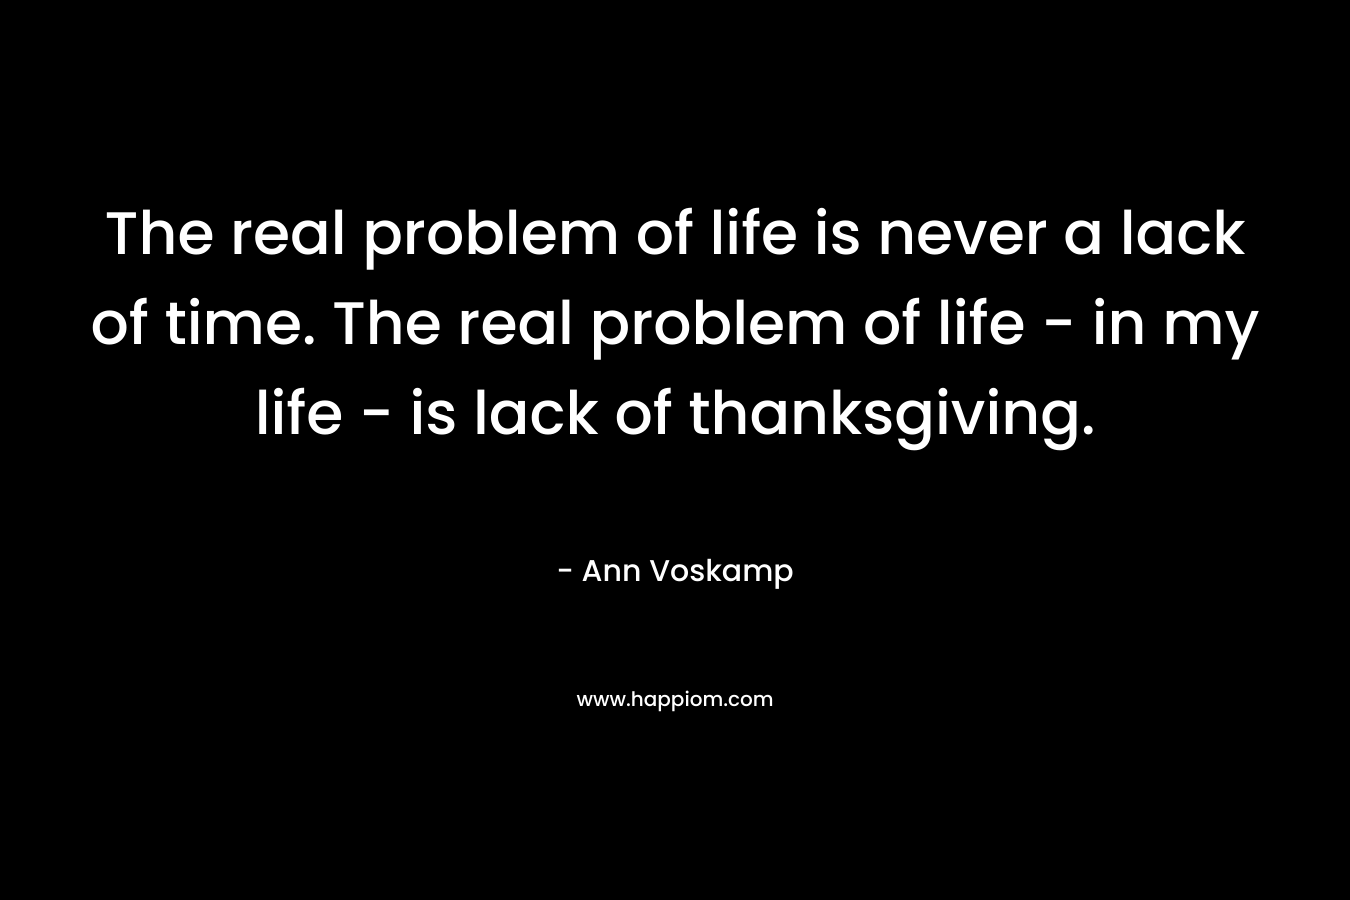 The real problem of life is never a lack of time. The real problem of life – in my life – is lack of thanksgiving. – Ann Voskamp